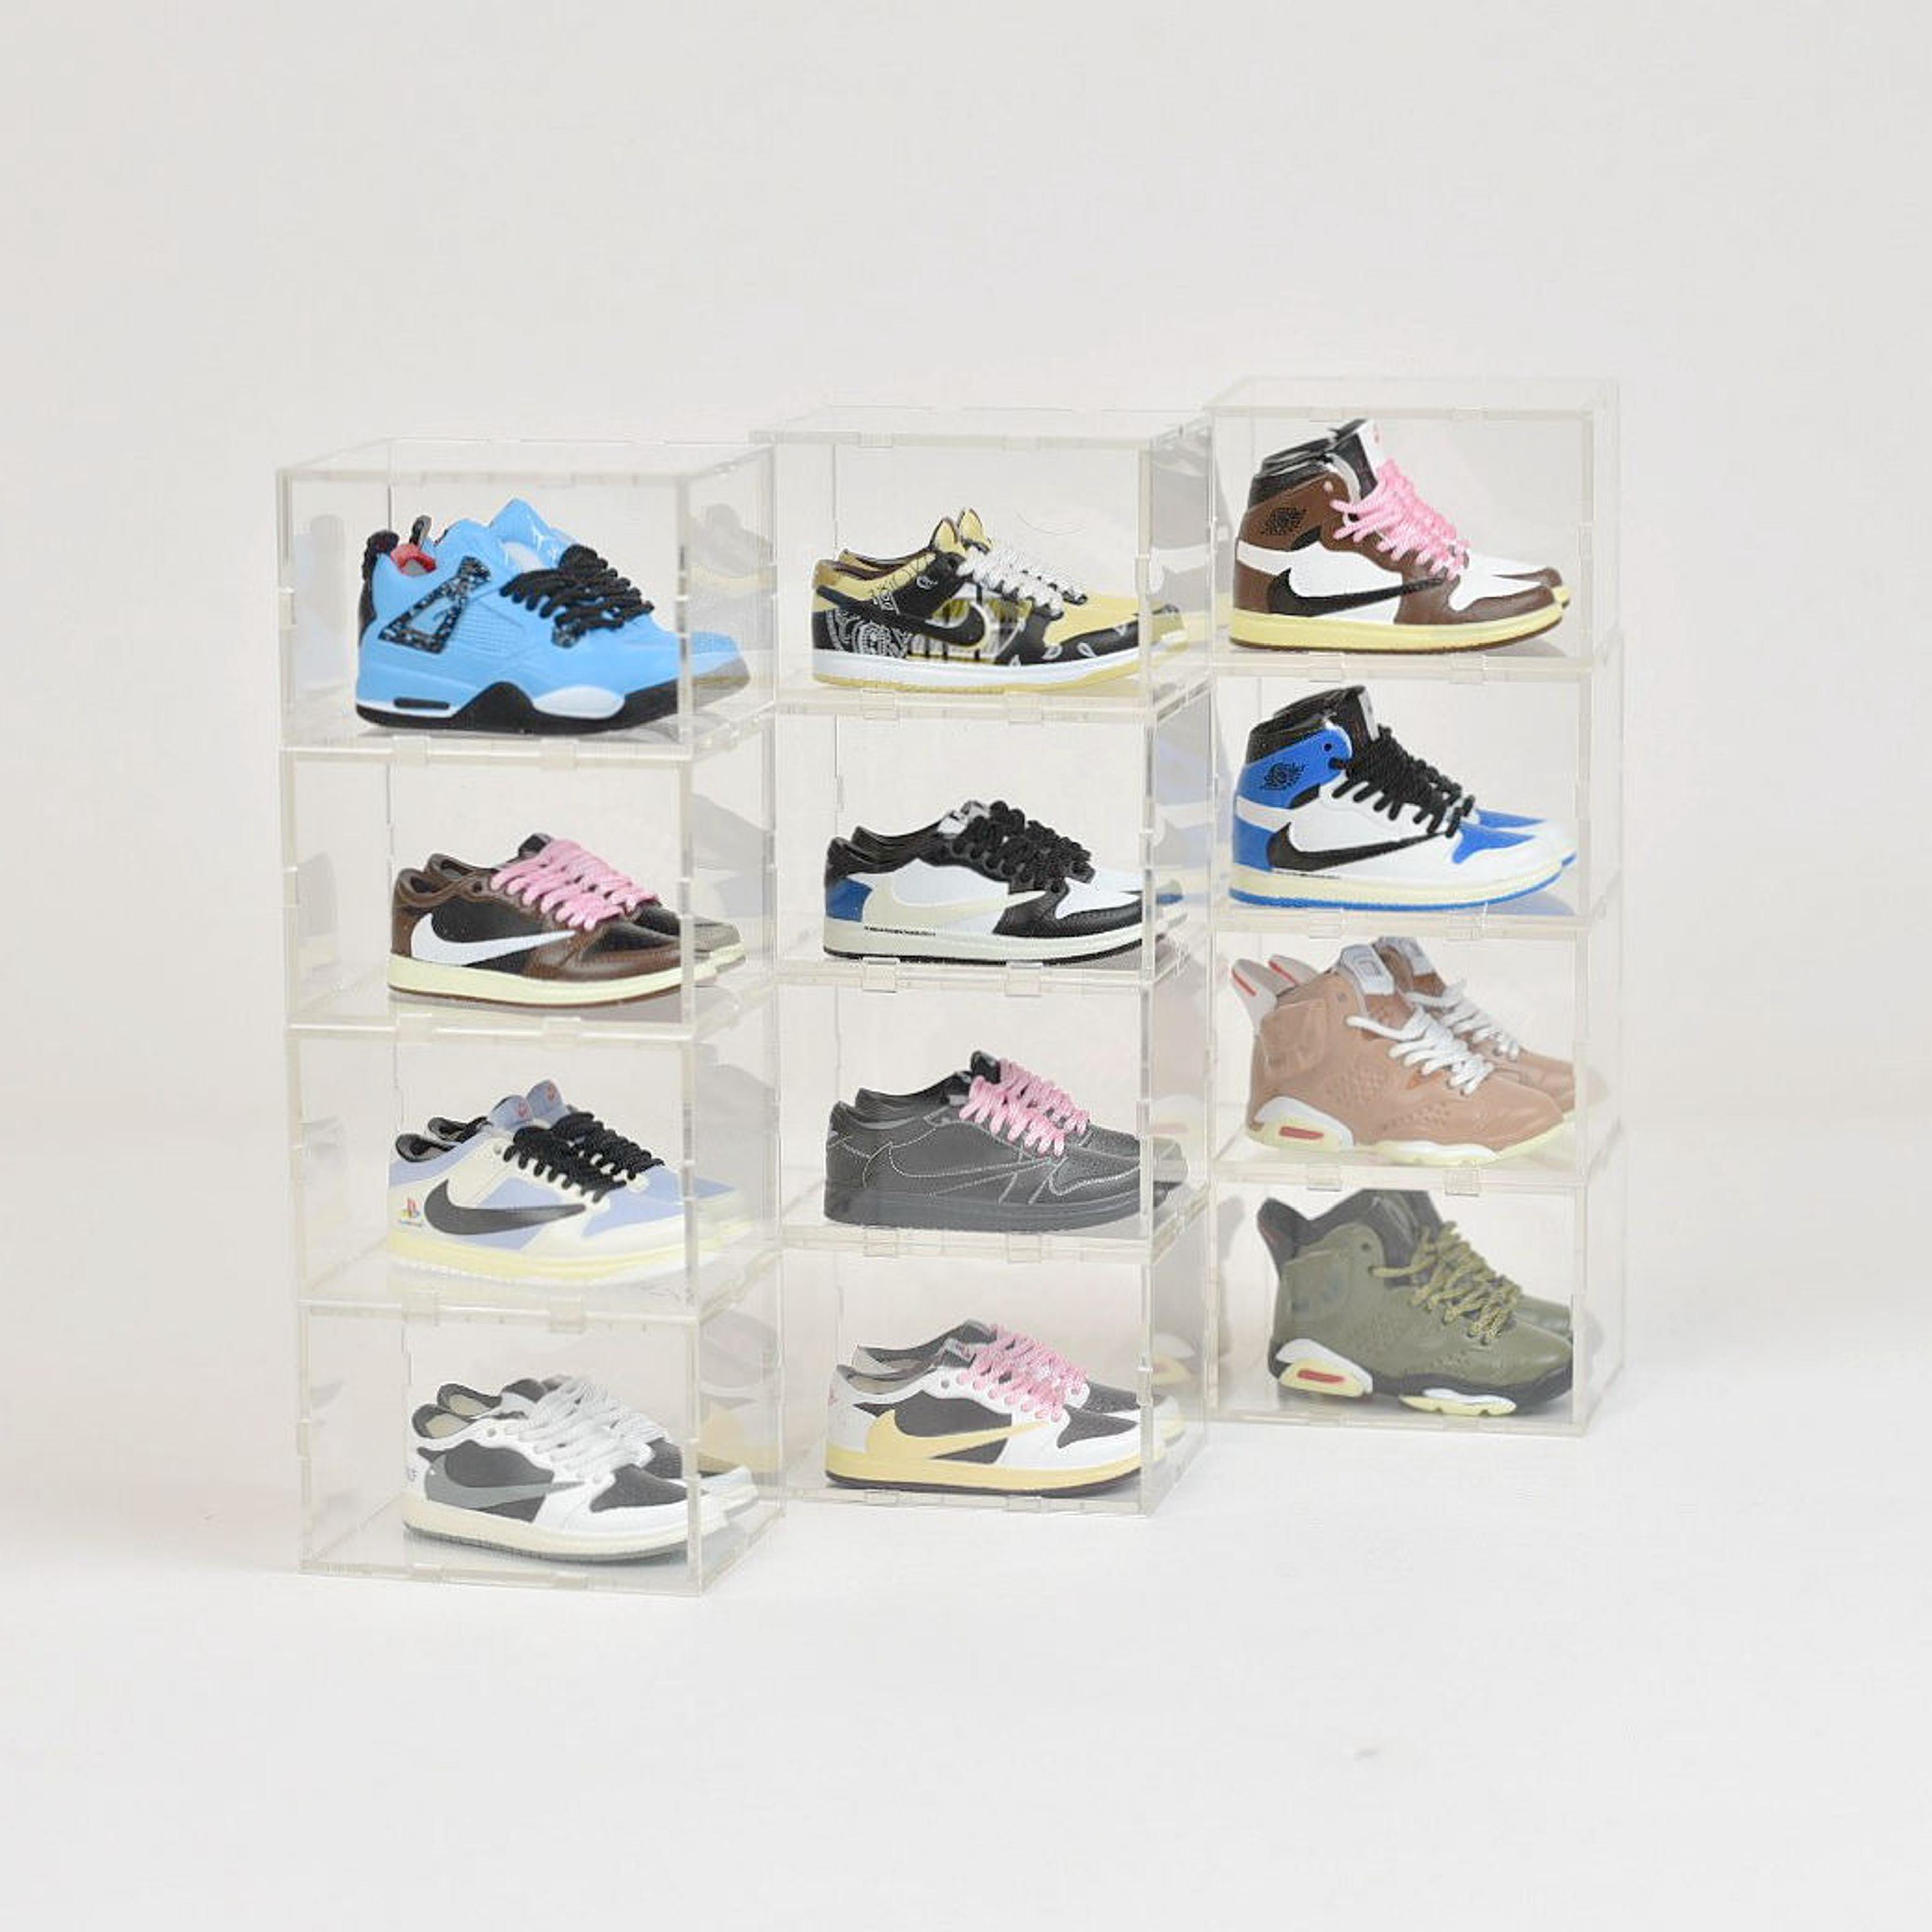 Alternate View 1 of Travis Scott Collaboration Mini Sneakers with Display Case